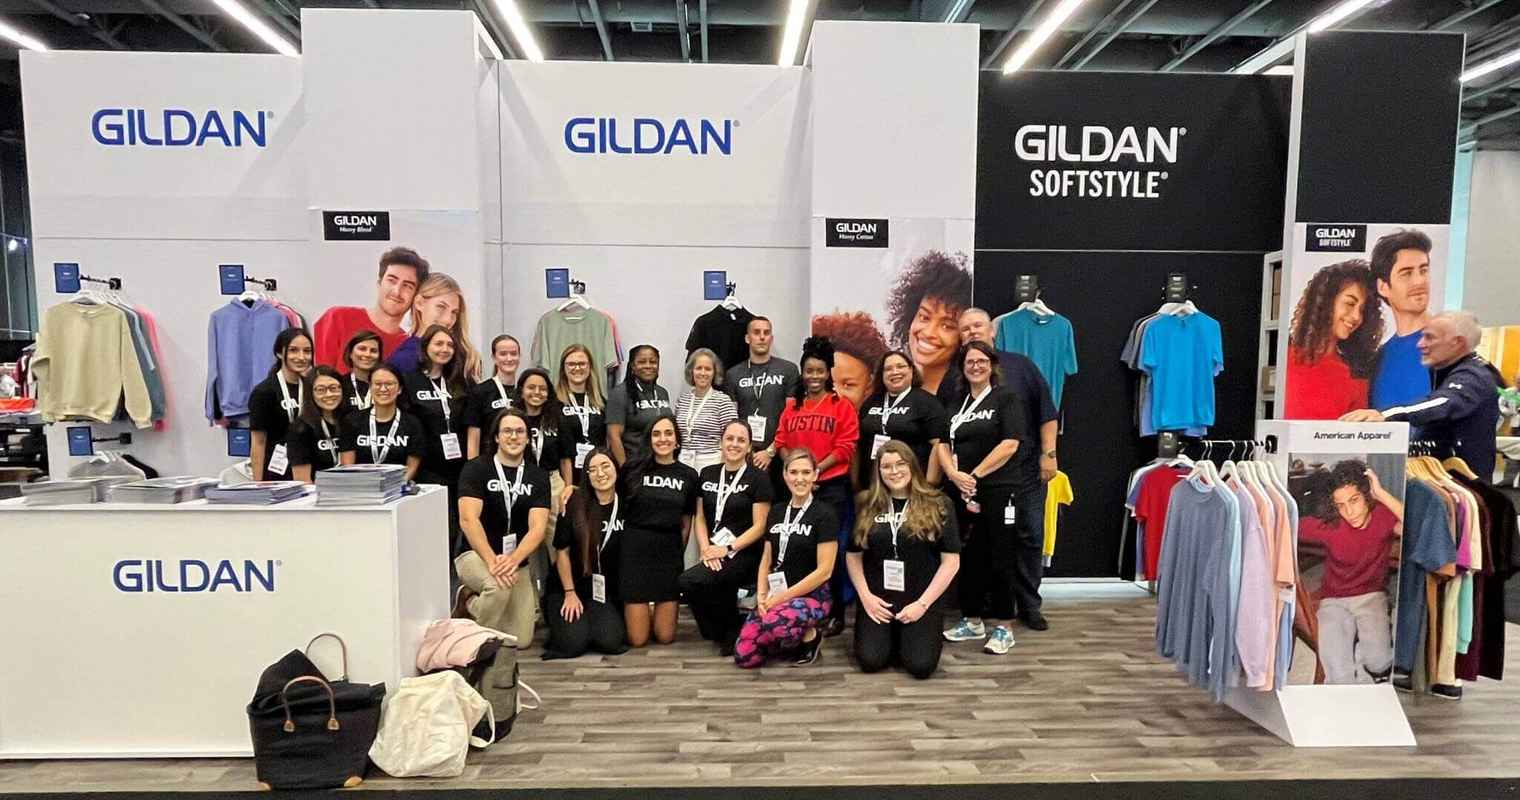 Employees from Gildan’s Head Office in Montreal are smiling at the camera at a Tradeshow event.